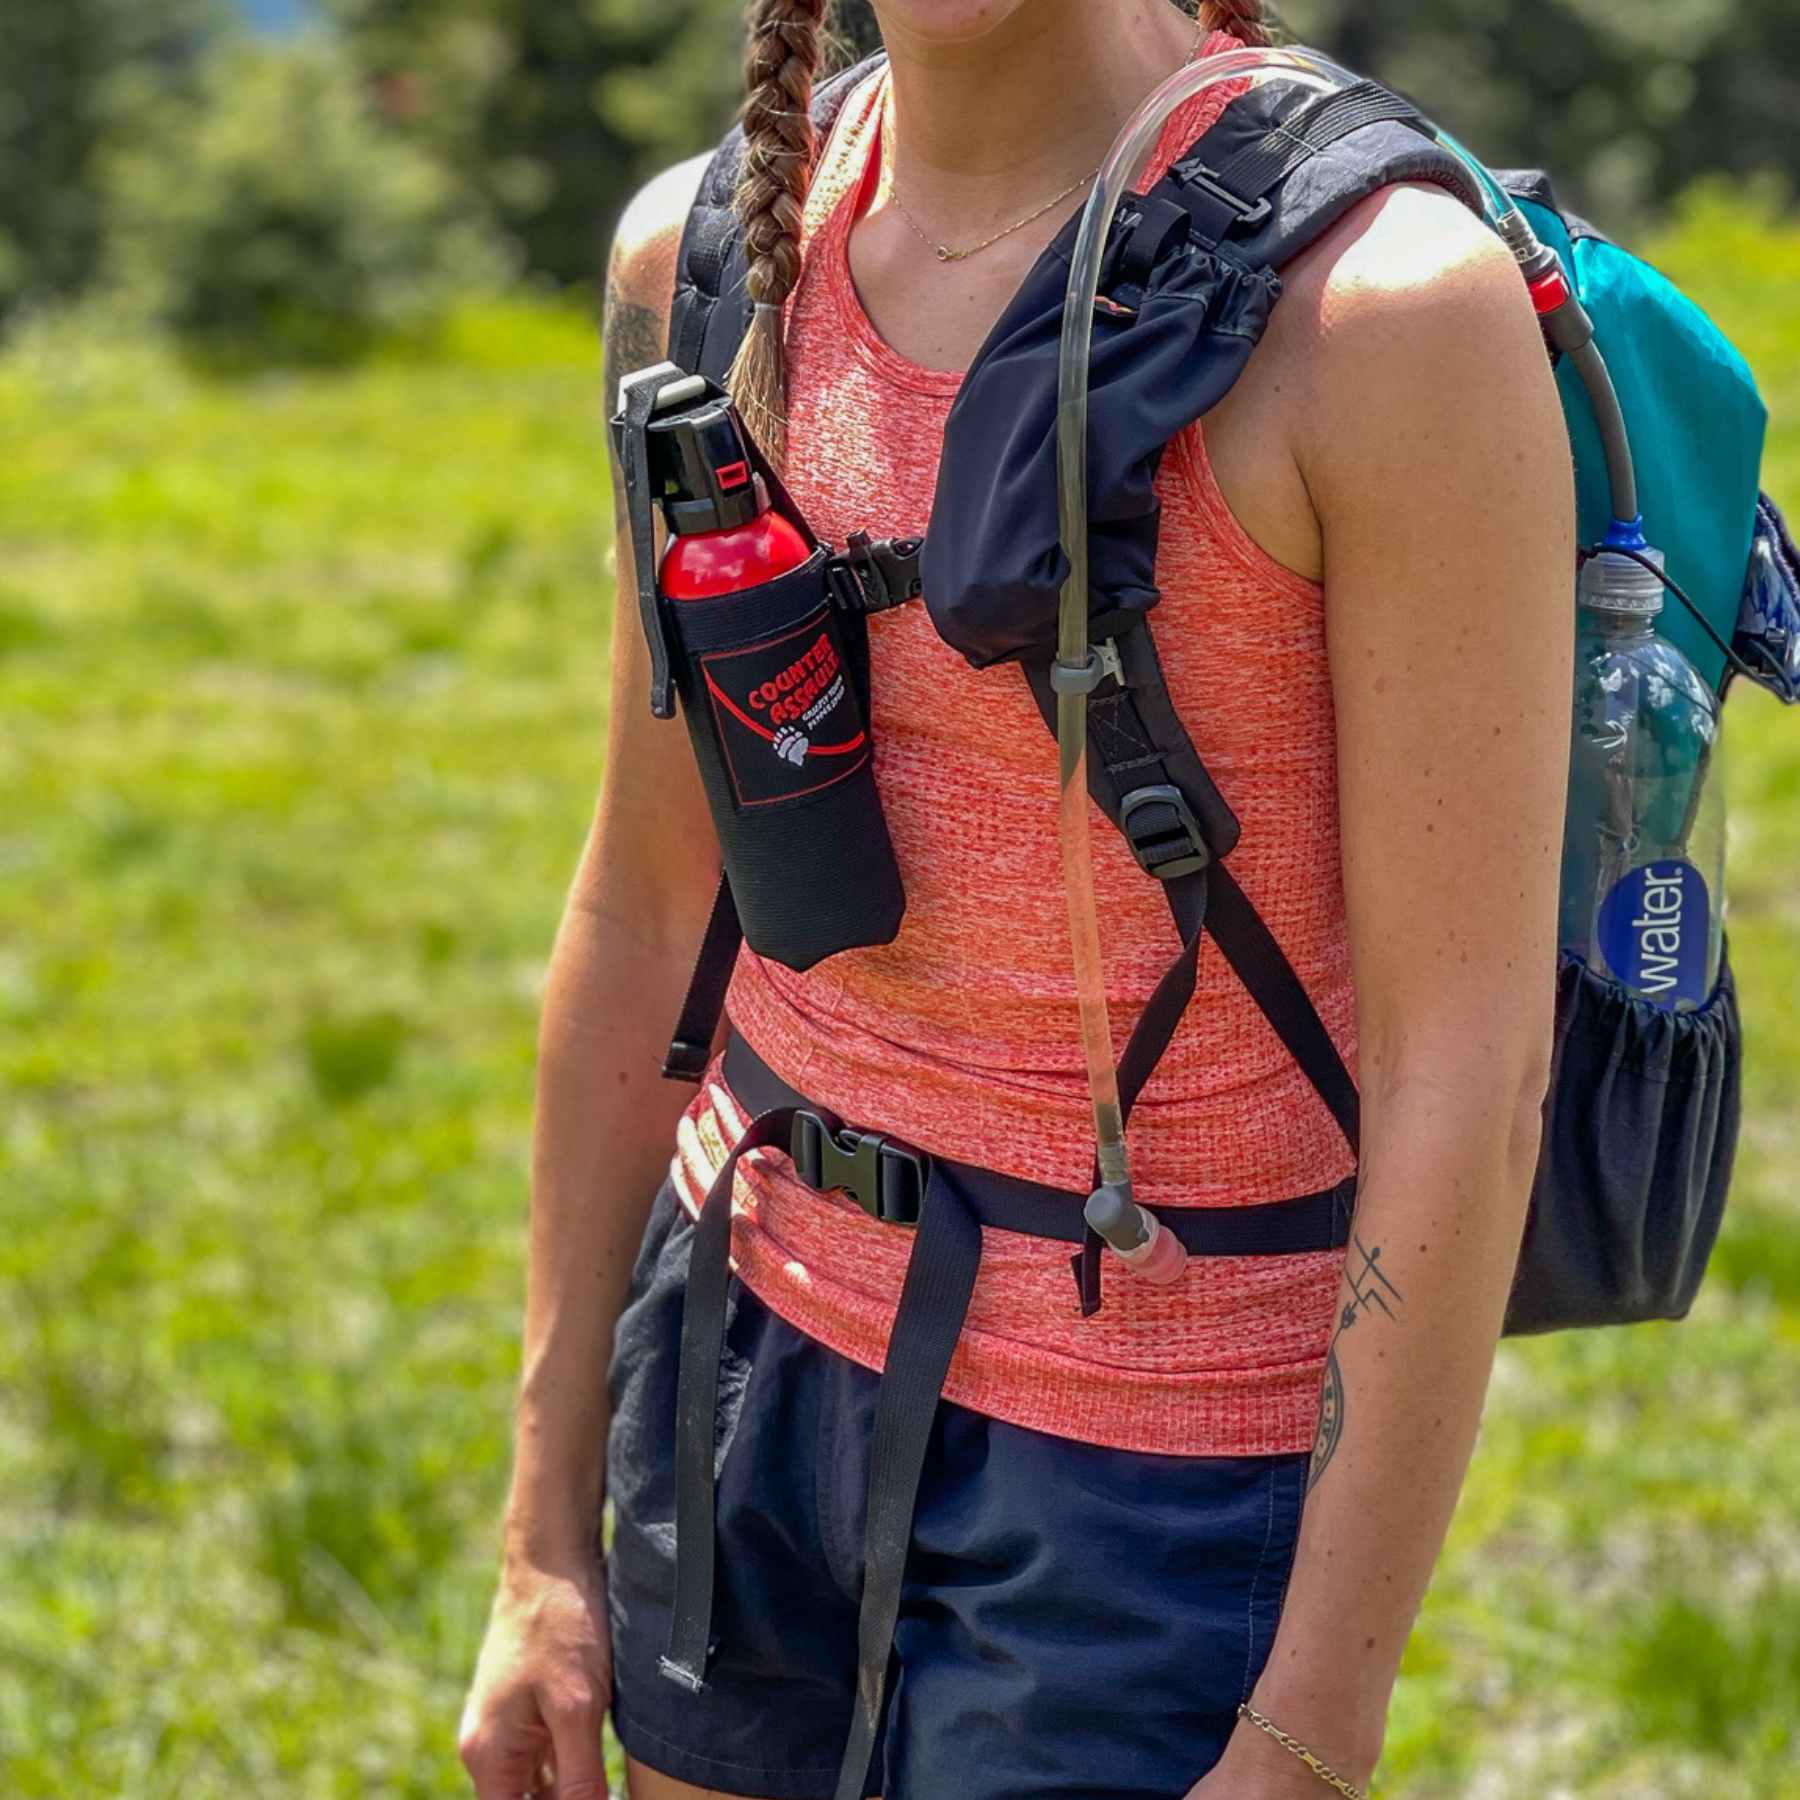 Woman hiker with bear spray strapped to chest.